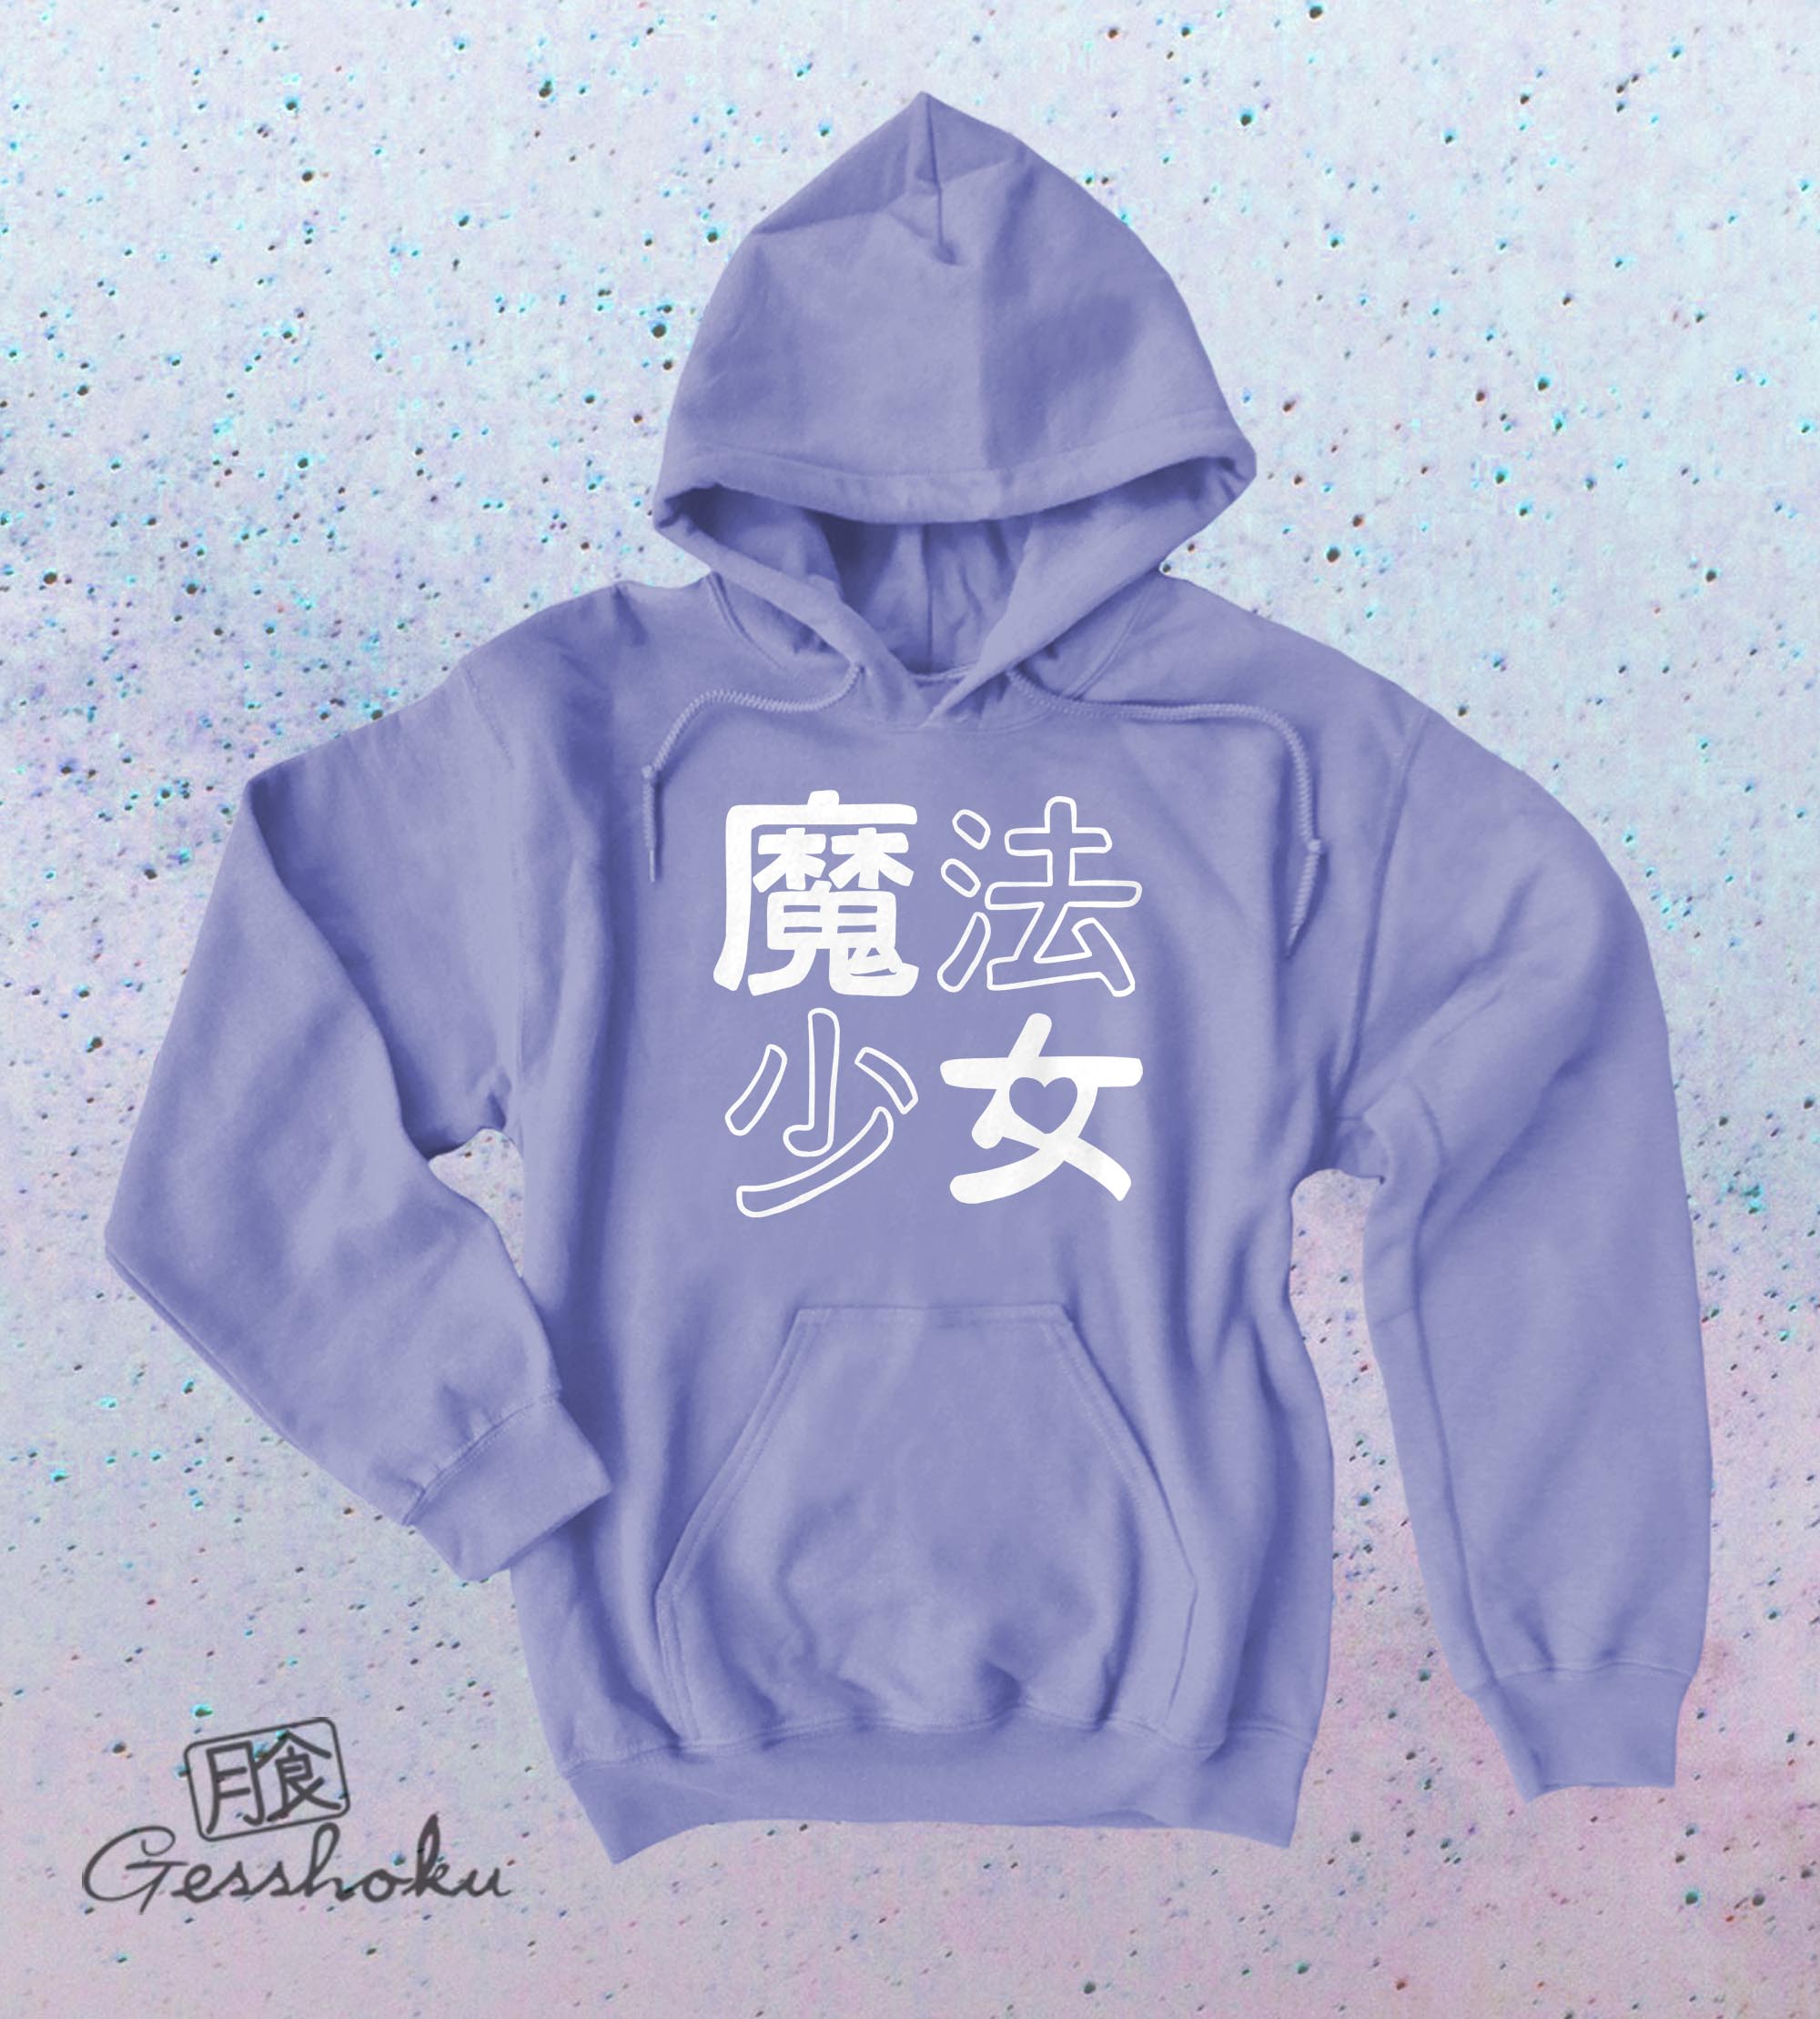 Mahou Shoujo Magical Girl Pullover Hoodie - Violet